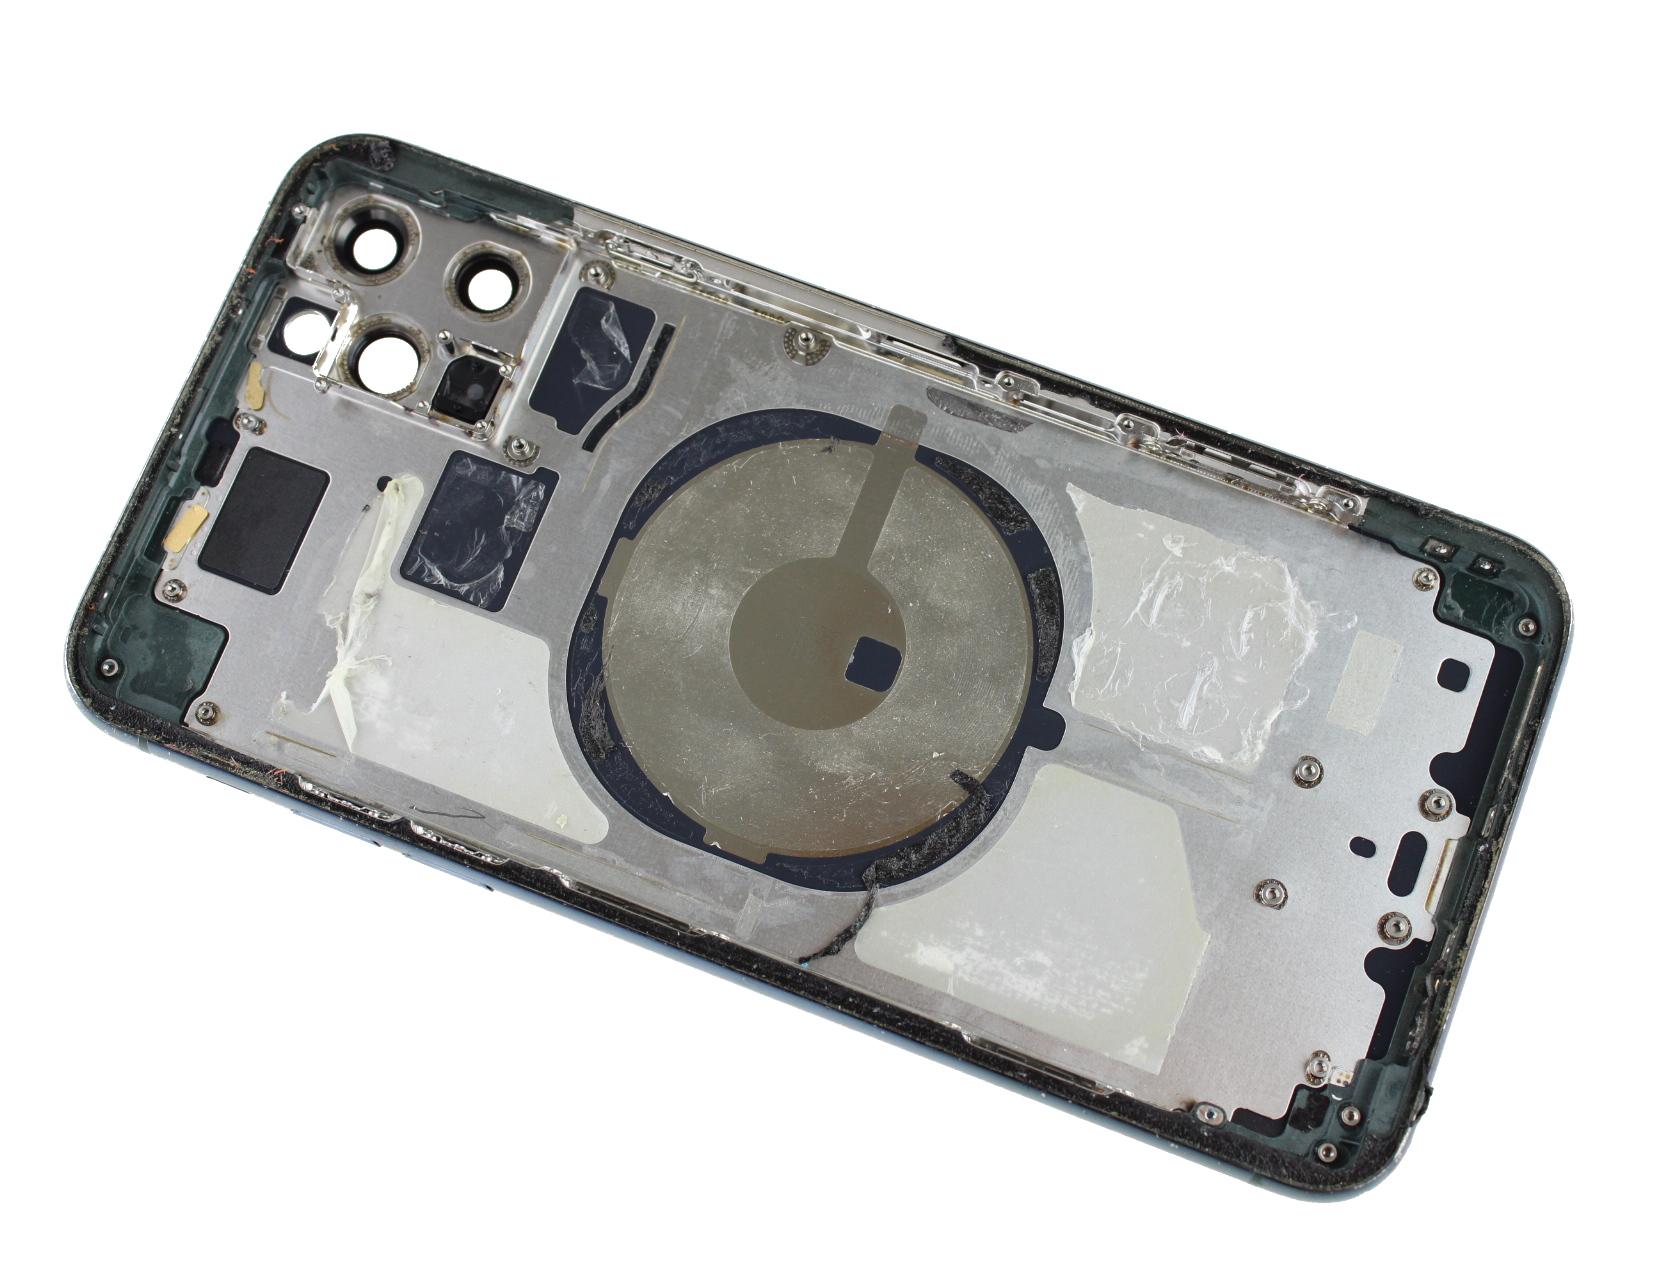 Original back cover with frame iPhone 11 Pro green (Disassembly)